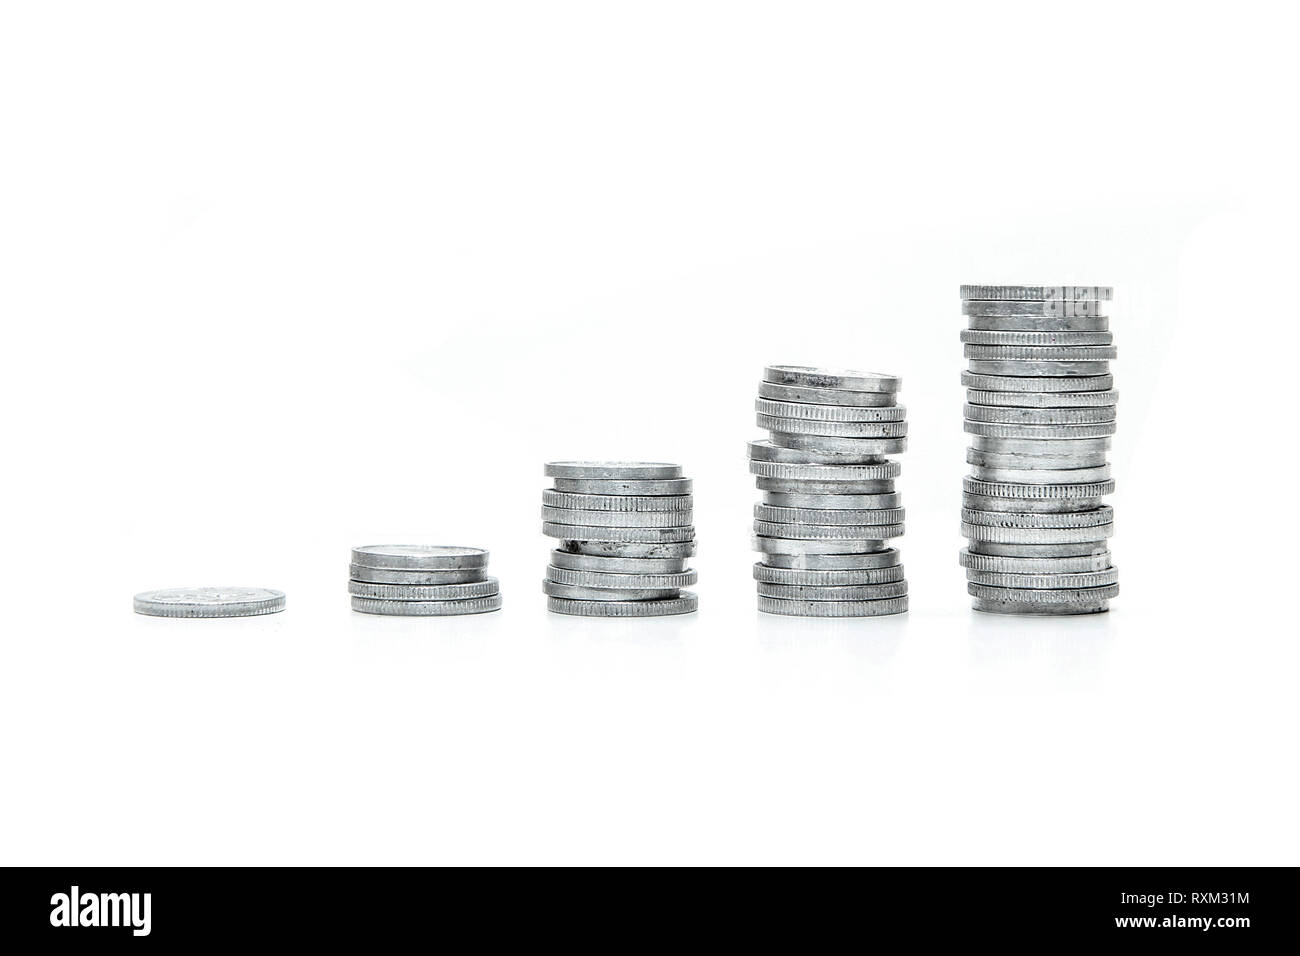 A column of small coins sorted from the lowest to the highest one. Symbolises the growth of prices or inflation. Stock Photo